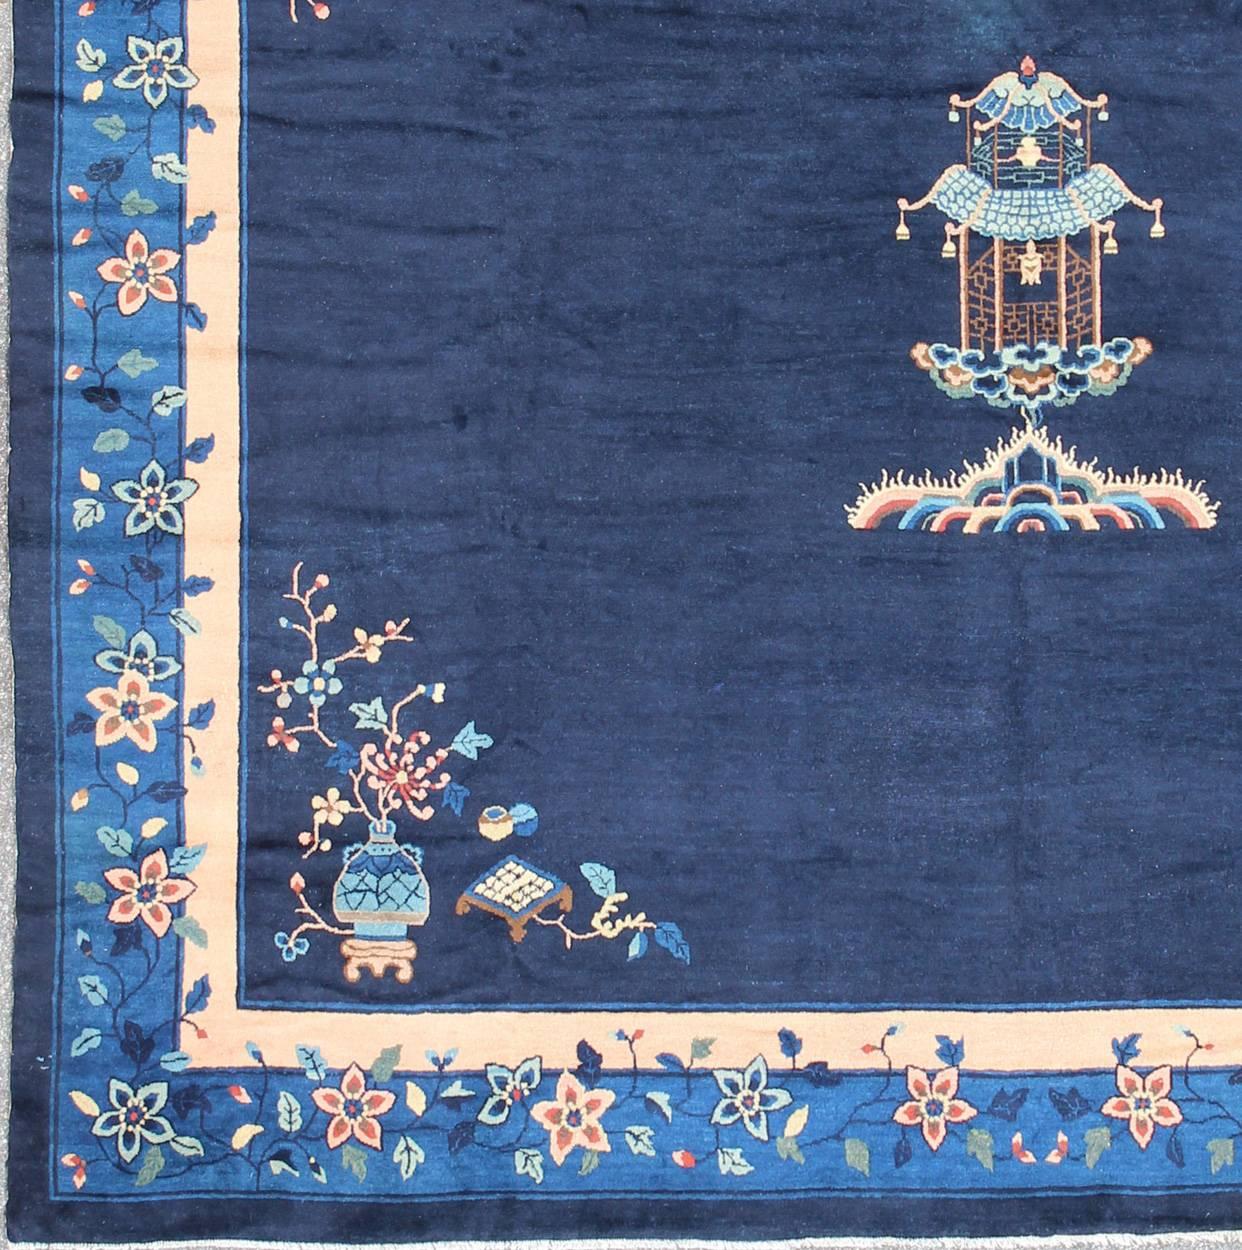 Alive with color and exotic patterns, this beautiful antique Chinese rug features a traditional Chinese design in blue and sapphire tones. Handwoven in China in the early 20th century, this distinctive piece showcases a sophisticated pattern